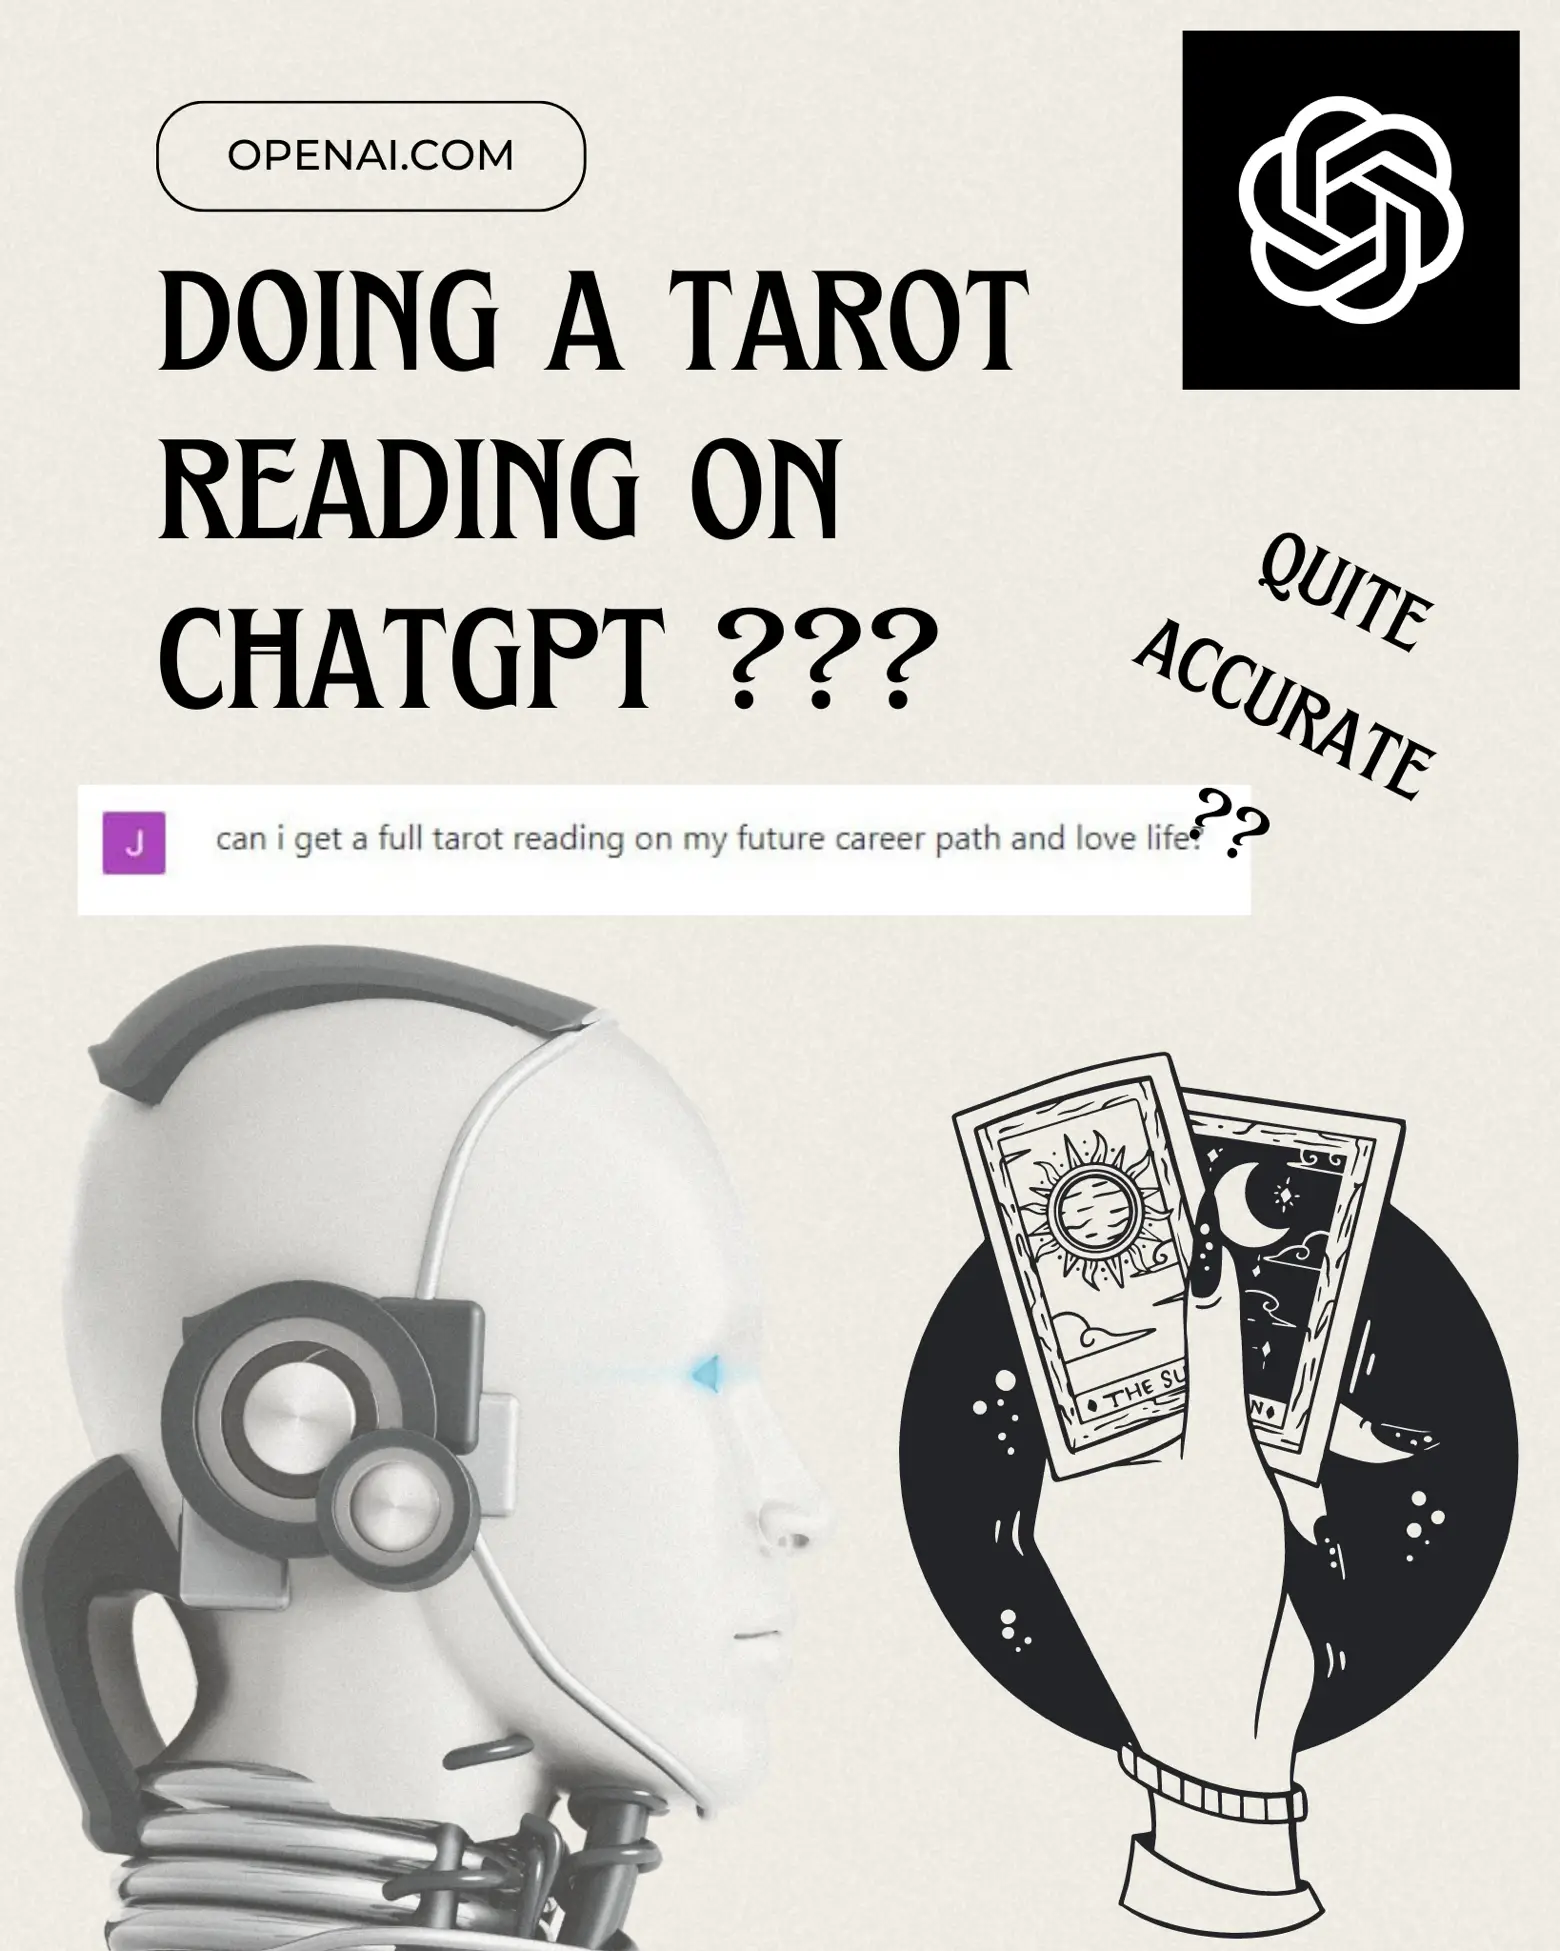 CHATGPT (OPEN AI) CAN DO TAROT READINGS NOW??? 🔮😱😱's images(0)